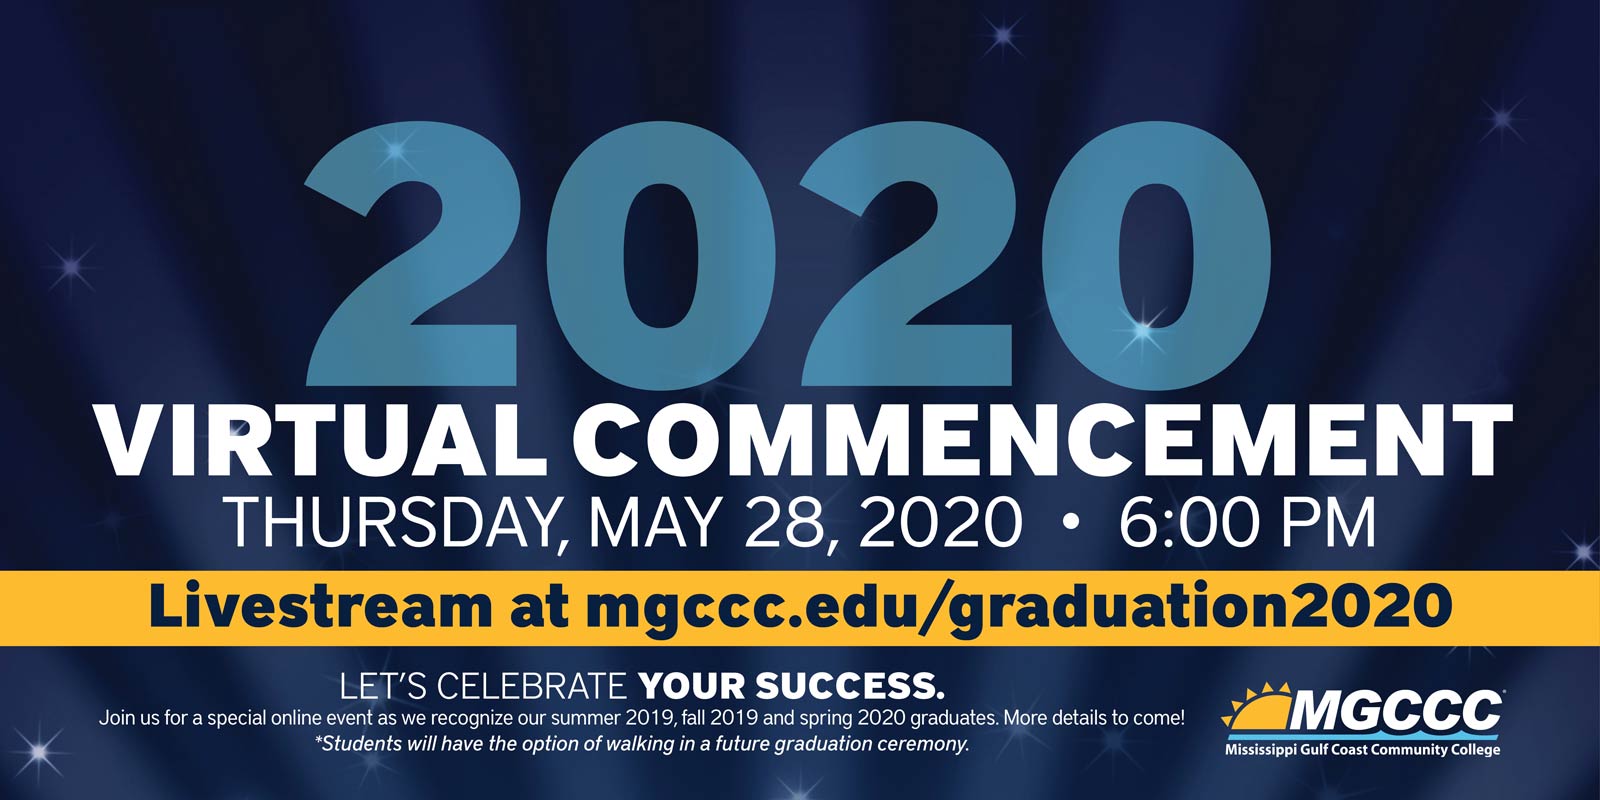 2020 Virtual Commencement - Mississippi Gulf Coast Community College